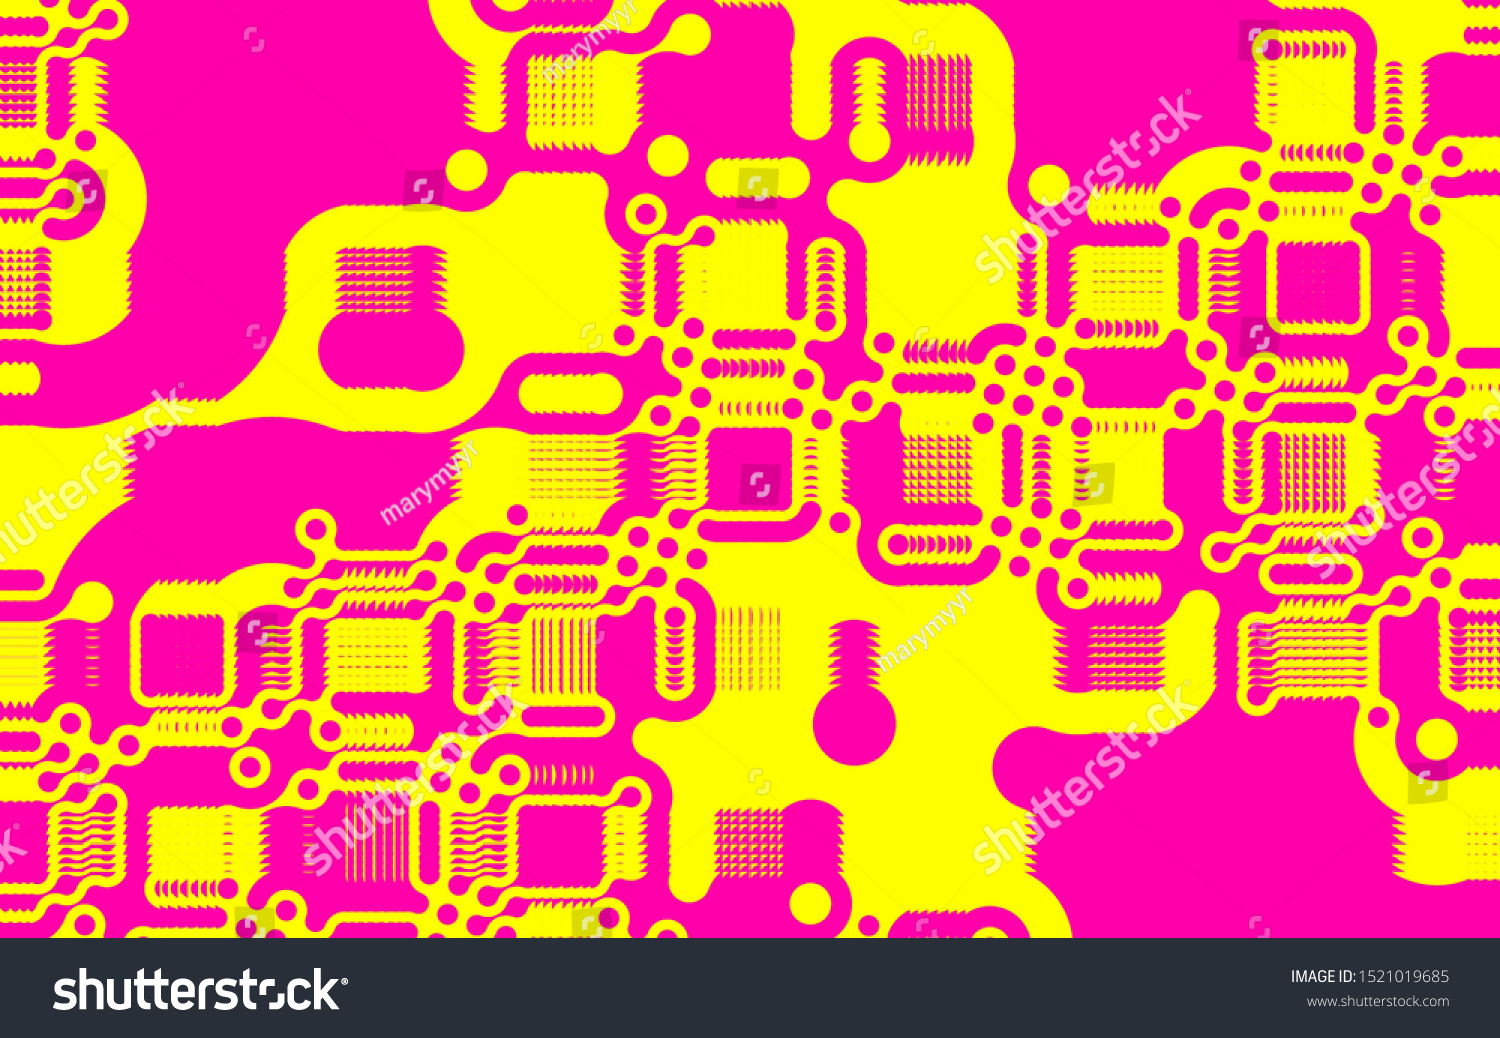 Light effects. Neon glow. Festive decoration. Colorful abstract background. Glowing texture. Shining pattern. #1521019685